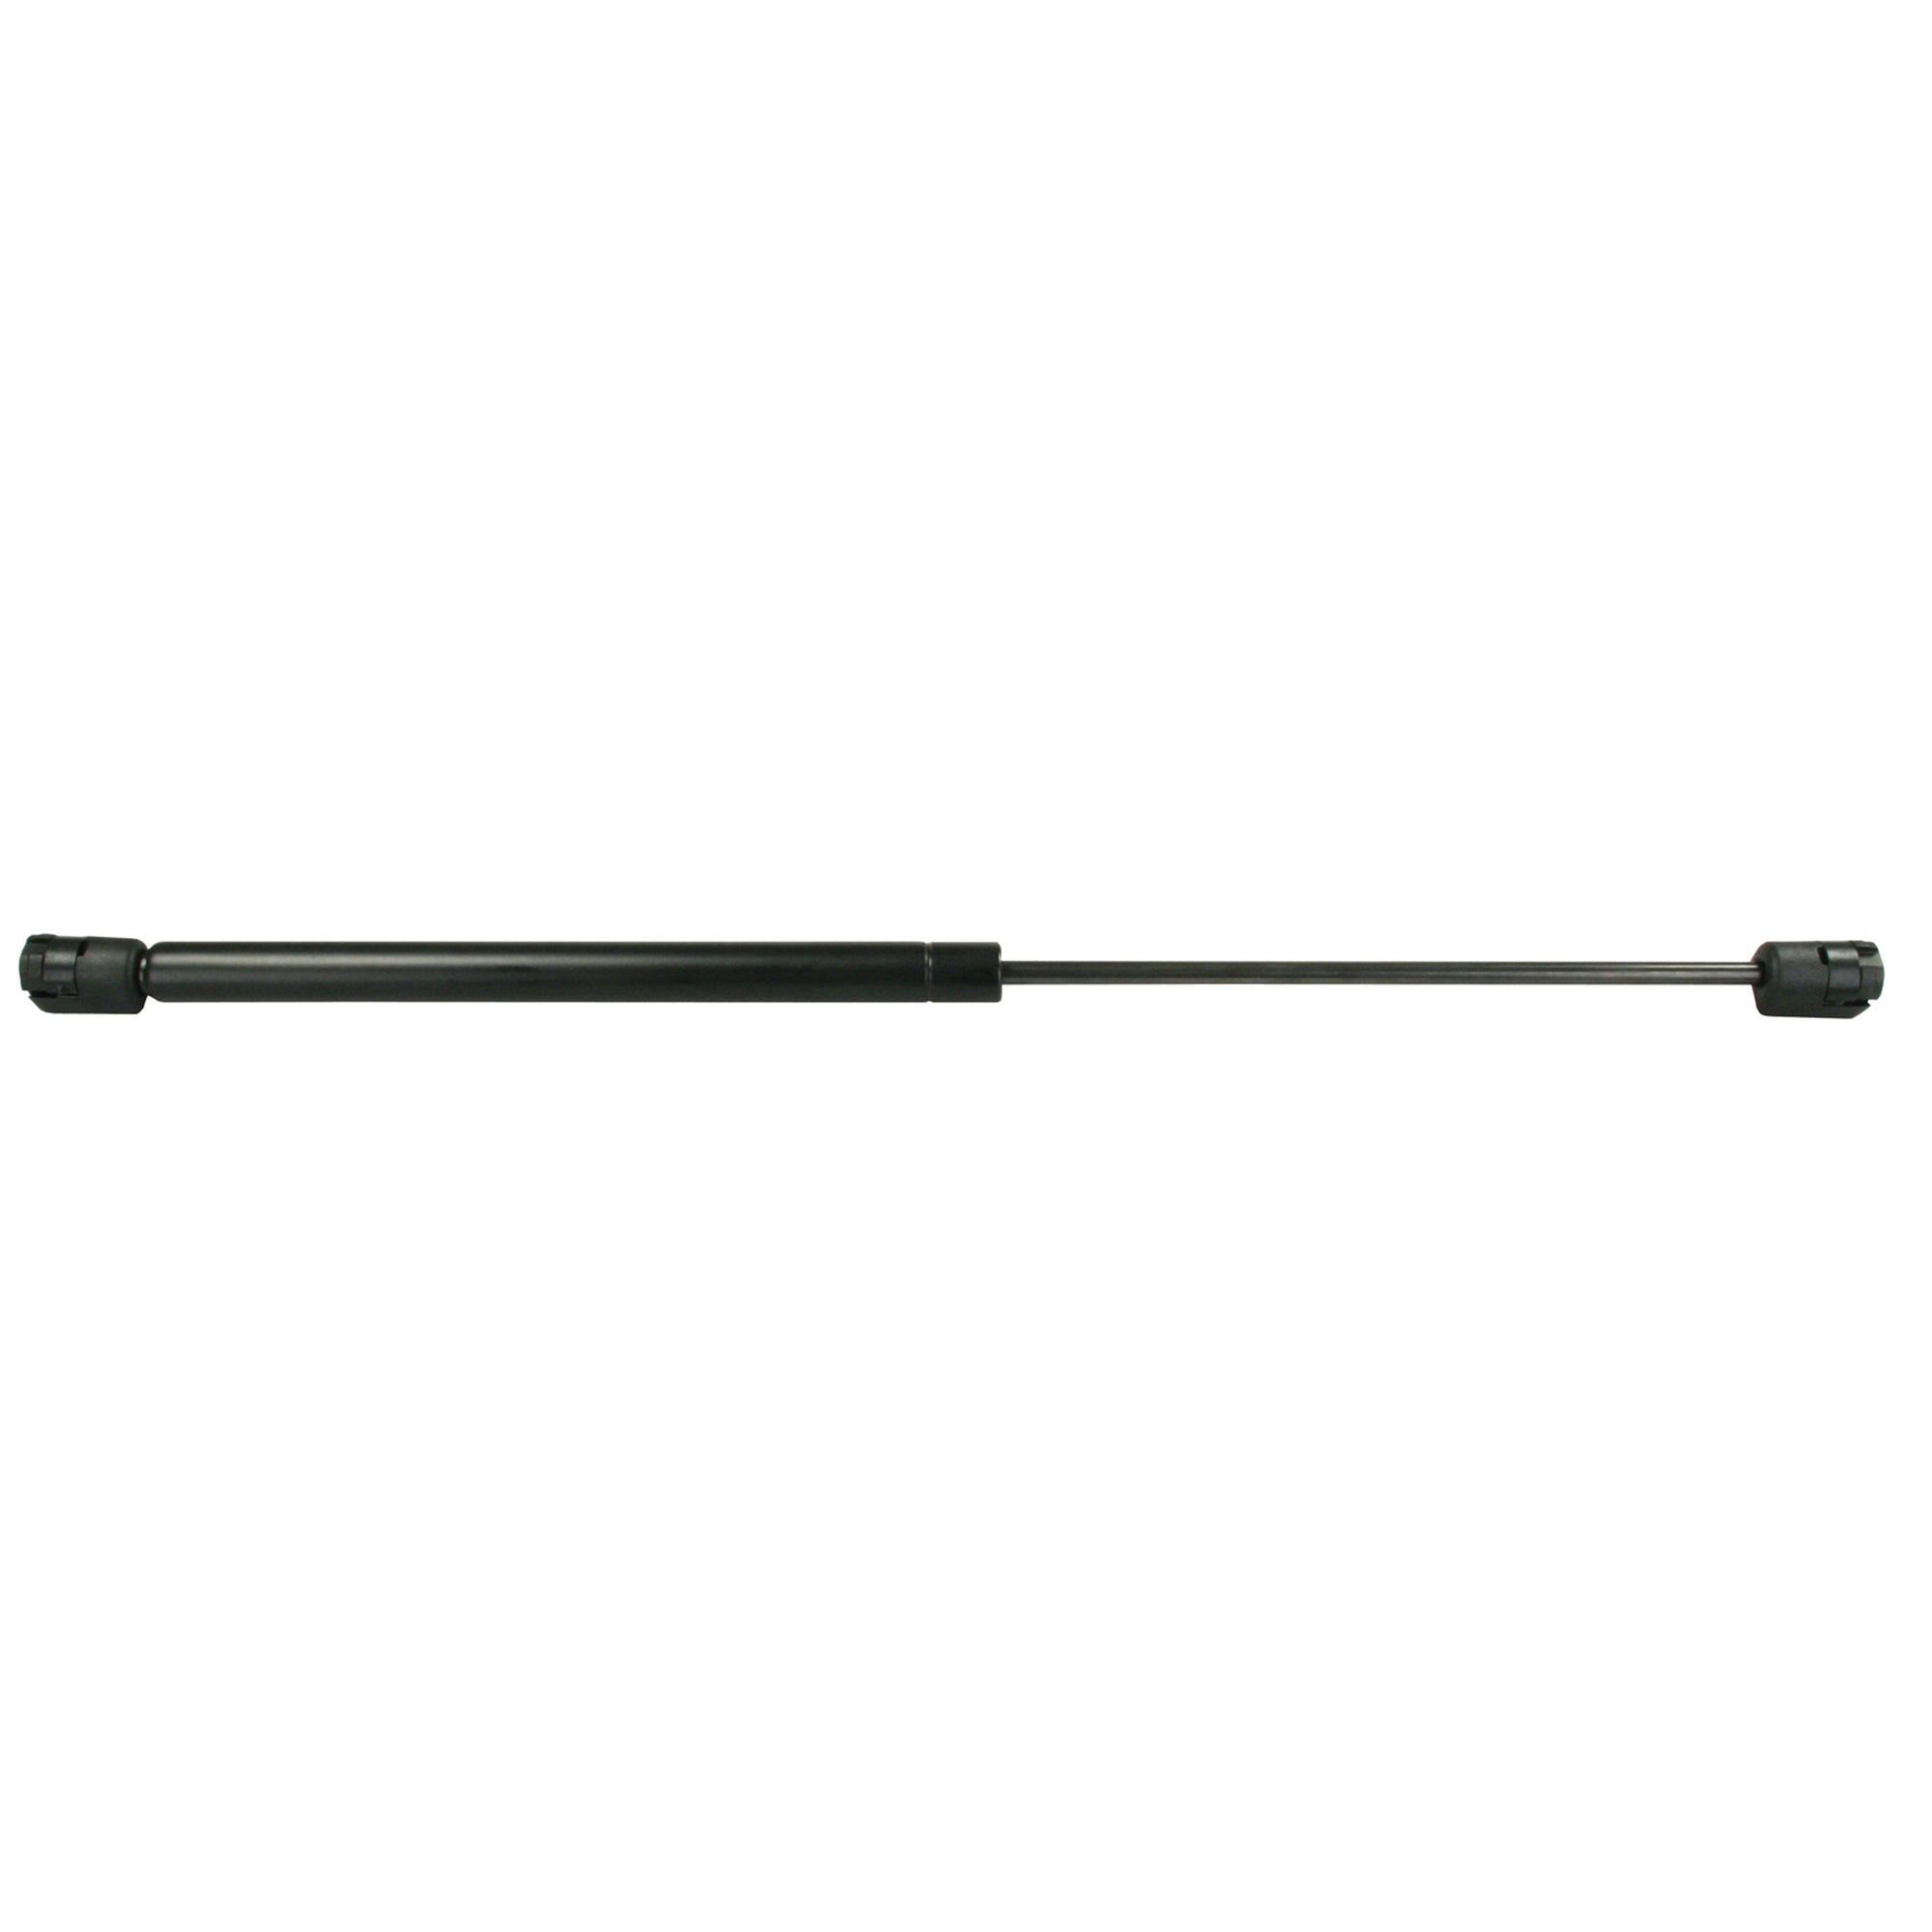 JR Products GSNI-4688-40 Gas Spring